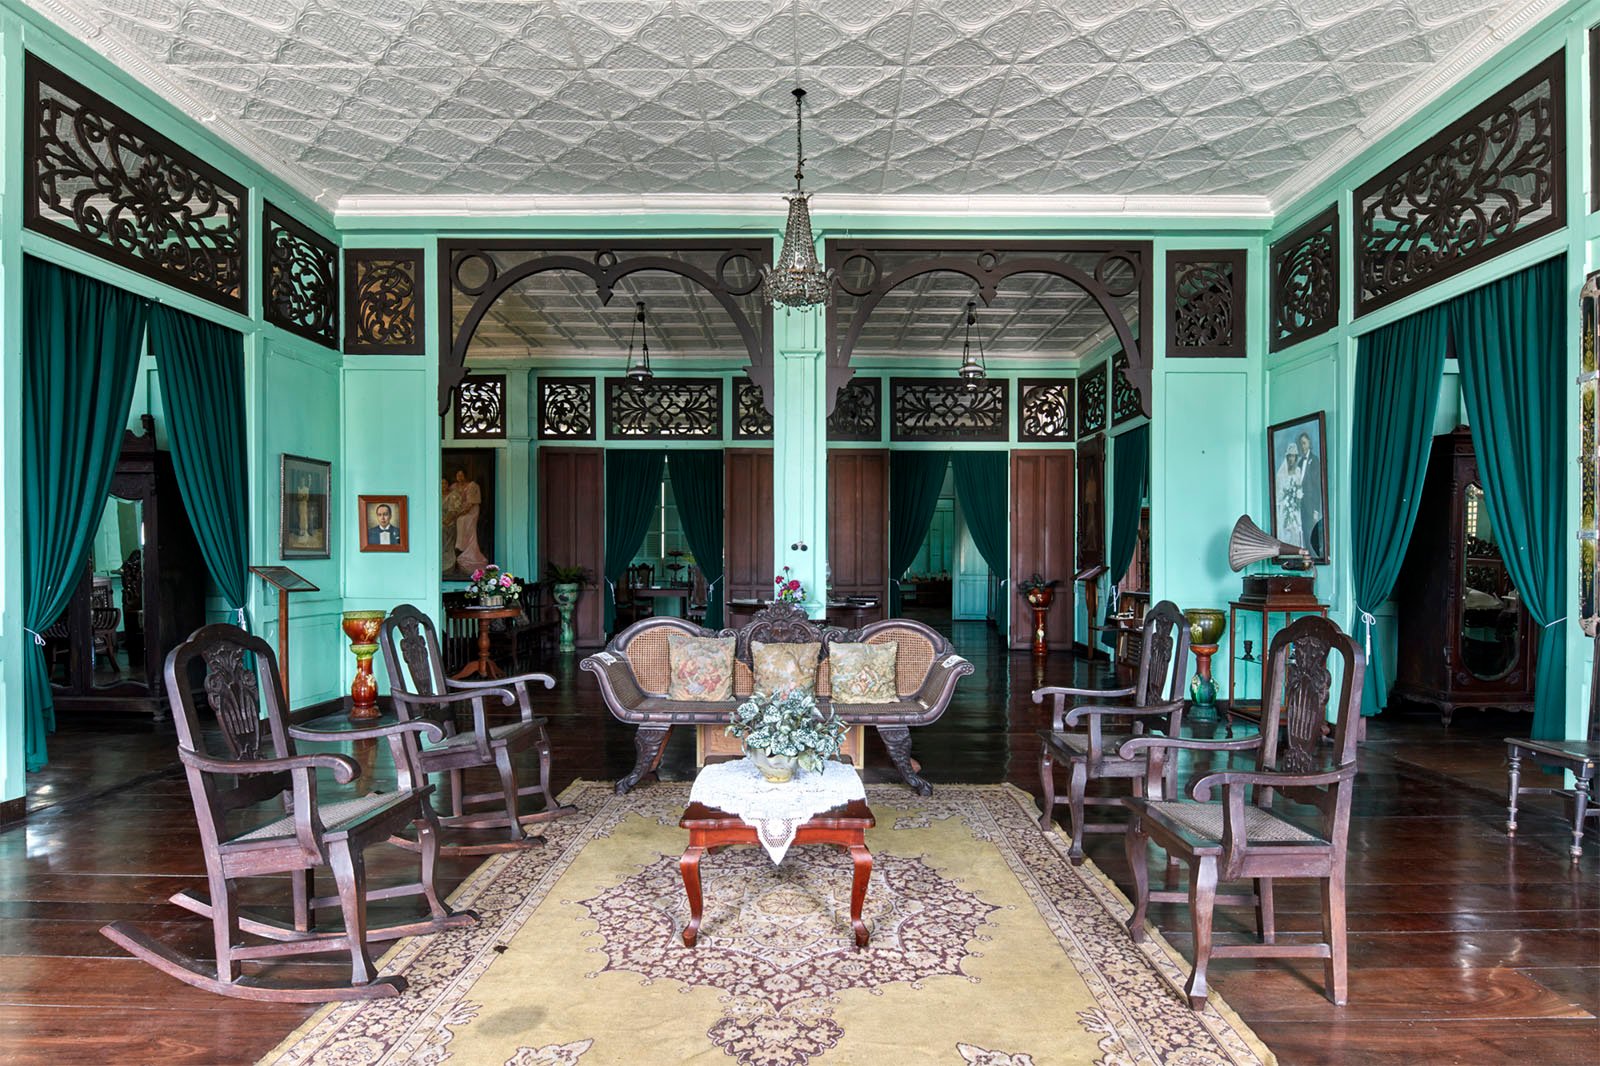 A traditional, elegant interior of a colonial-style room with wooden furniture, patterned ceiling, and large draped windows, featuring dark wooden armchairs and decorative wall panels.